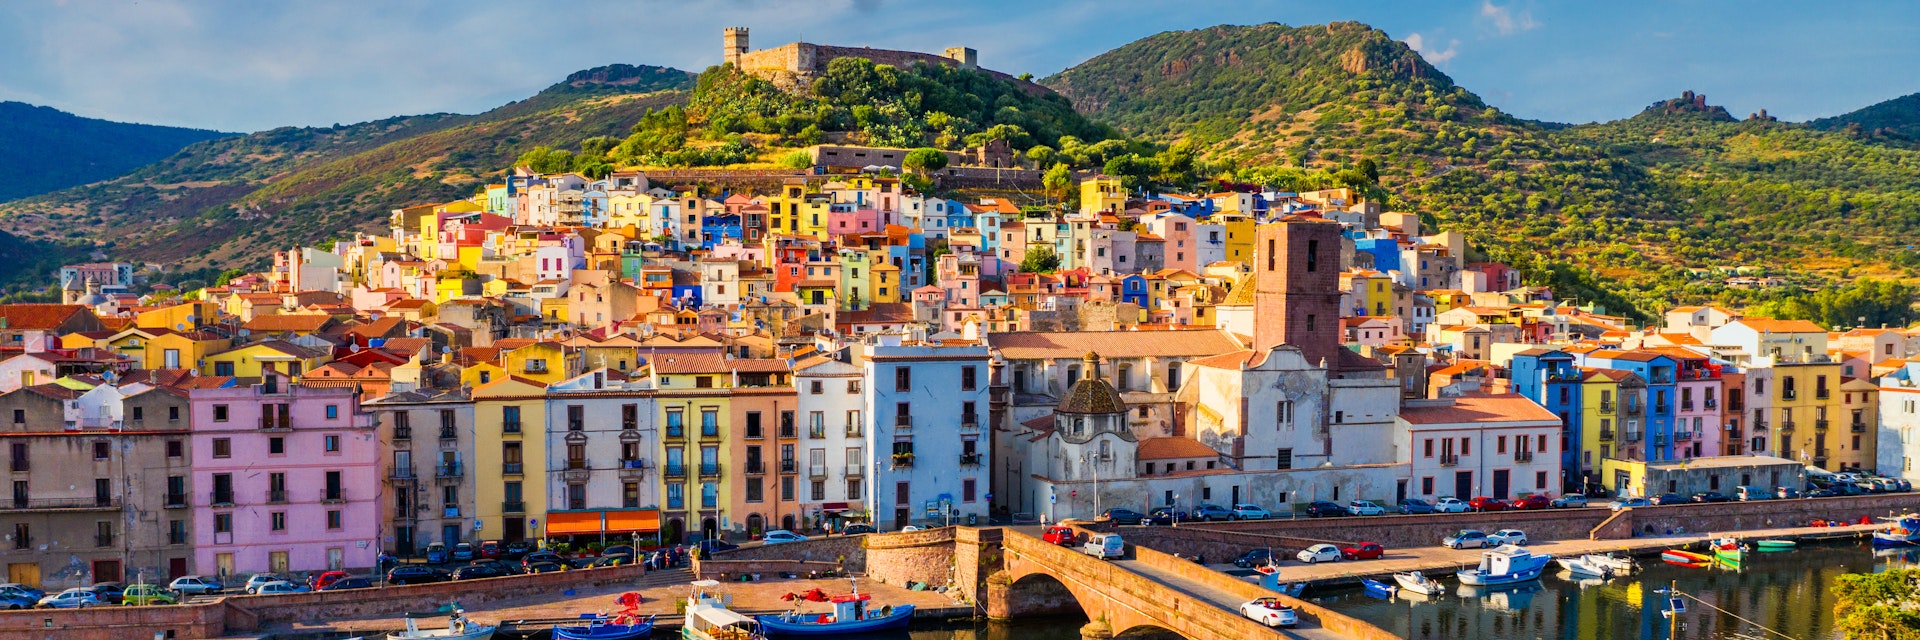 Aerial view of the beautiful village of Bosa with colored houses and a medieval castle. Bosa is located in the north-wesh of Sardinia, Italy. Aerial view of colorful houses in Bosa village, Sardegna.
1295073831